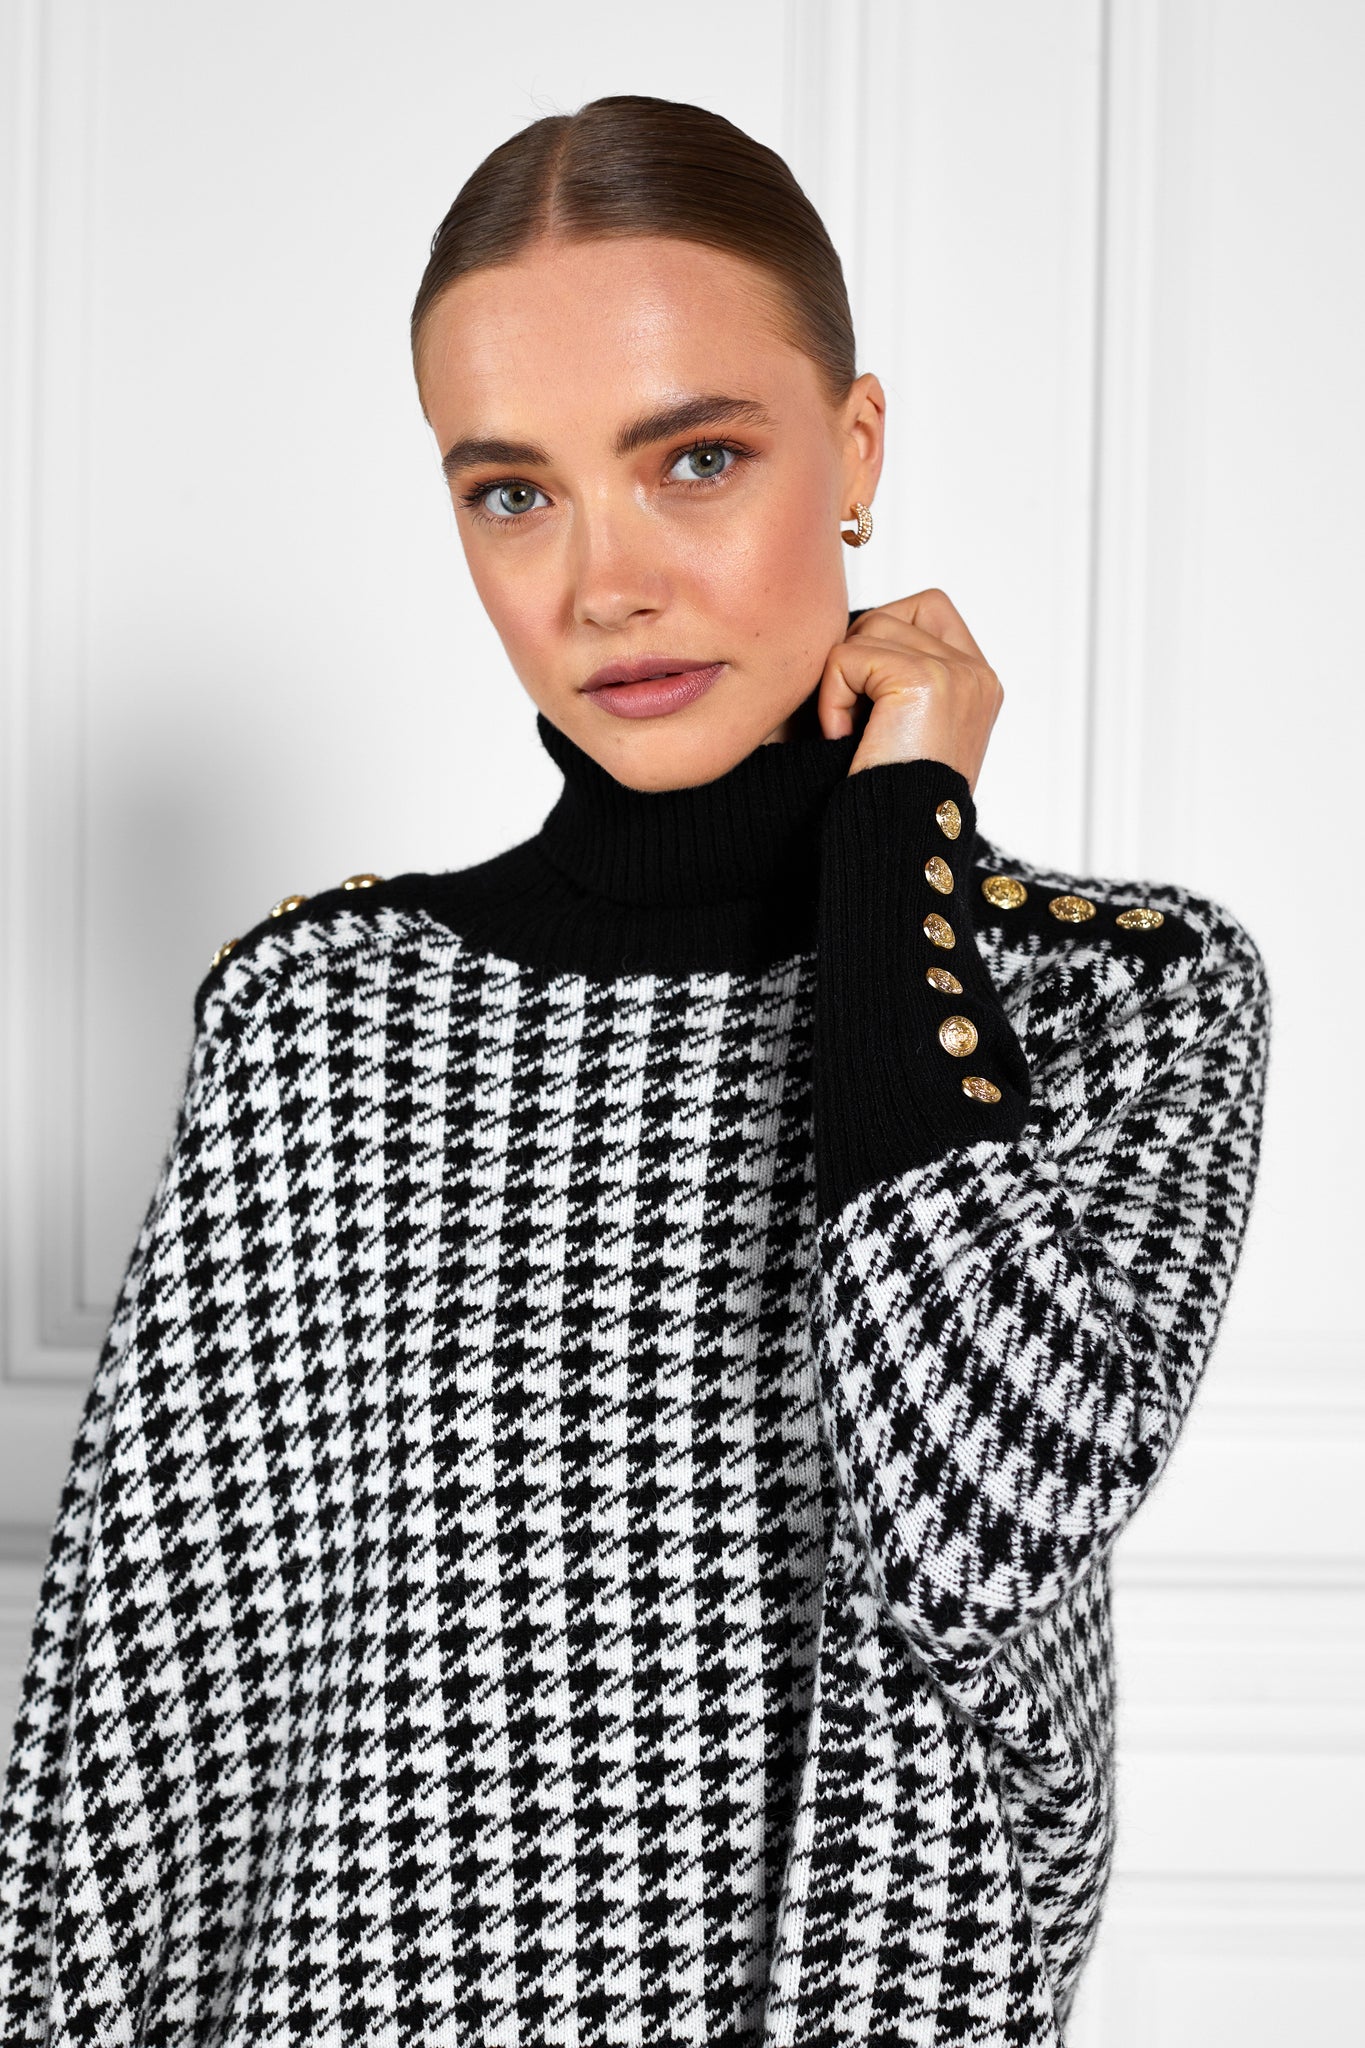 womens funnel neck batwing shaped cape in a white and black houndstooth knit with split side detail and contrast black neckline cuffs and hem